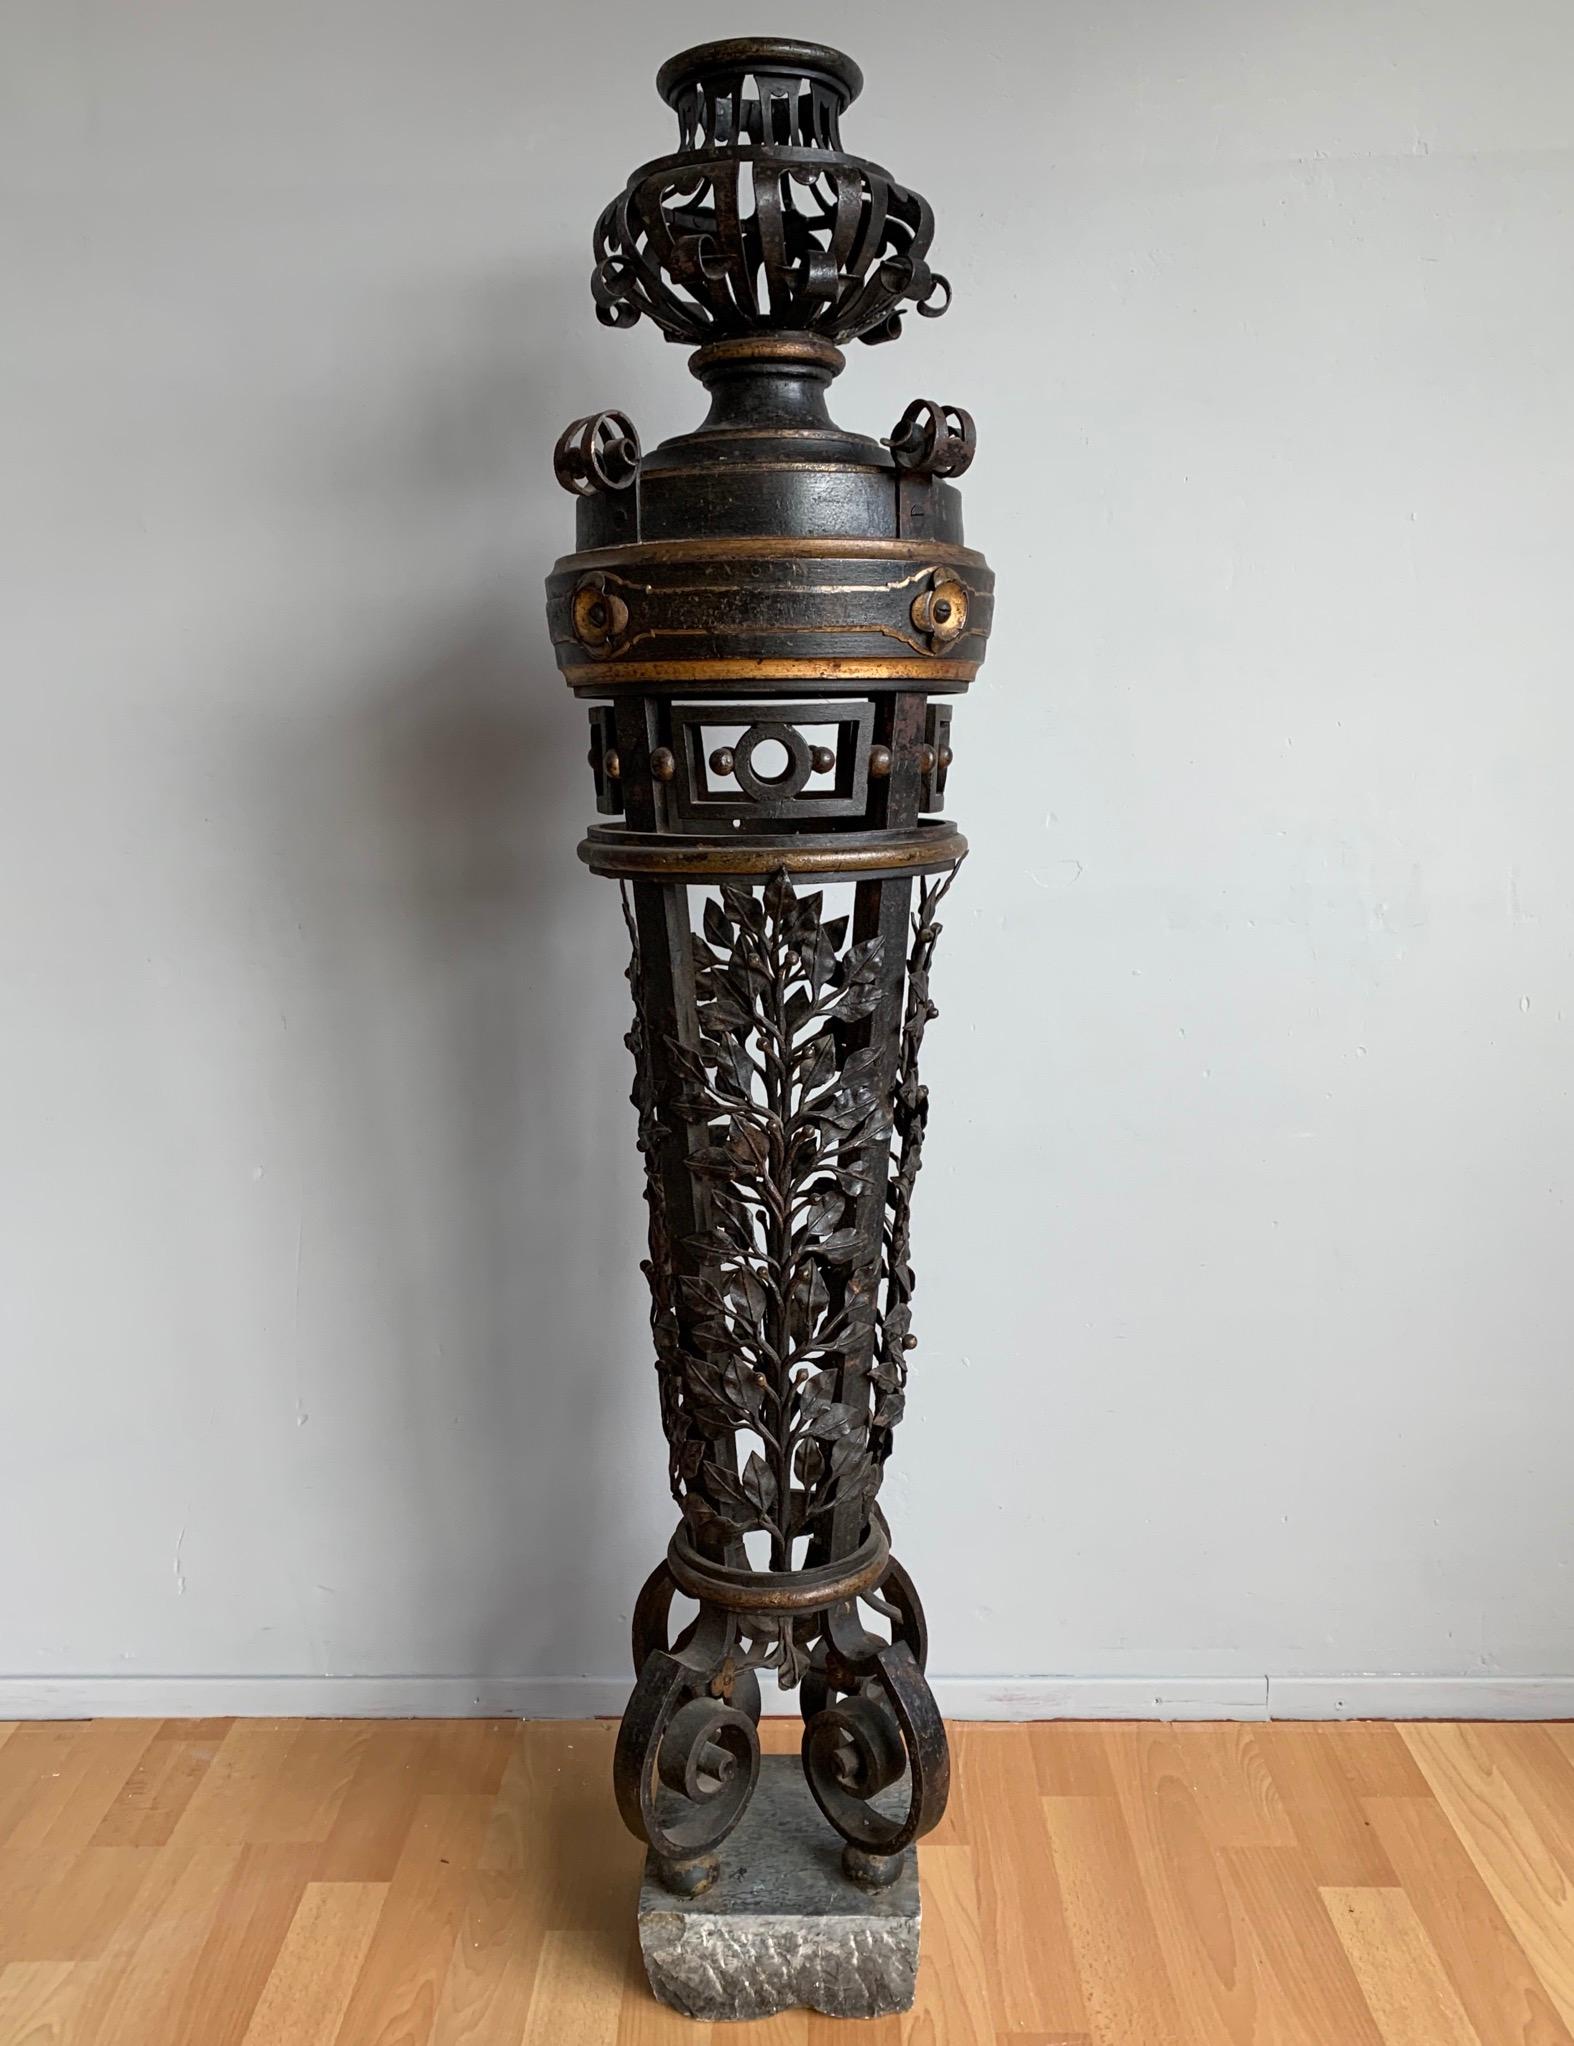 This unique newel post is beautifully and richly decorated all around.

This here newel post is another great example of the beautiful style, the top quality and the incredible durability of the work that 19th century European craftsman were